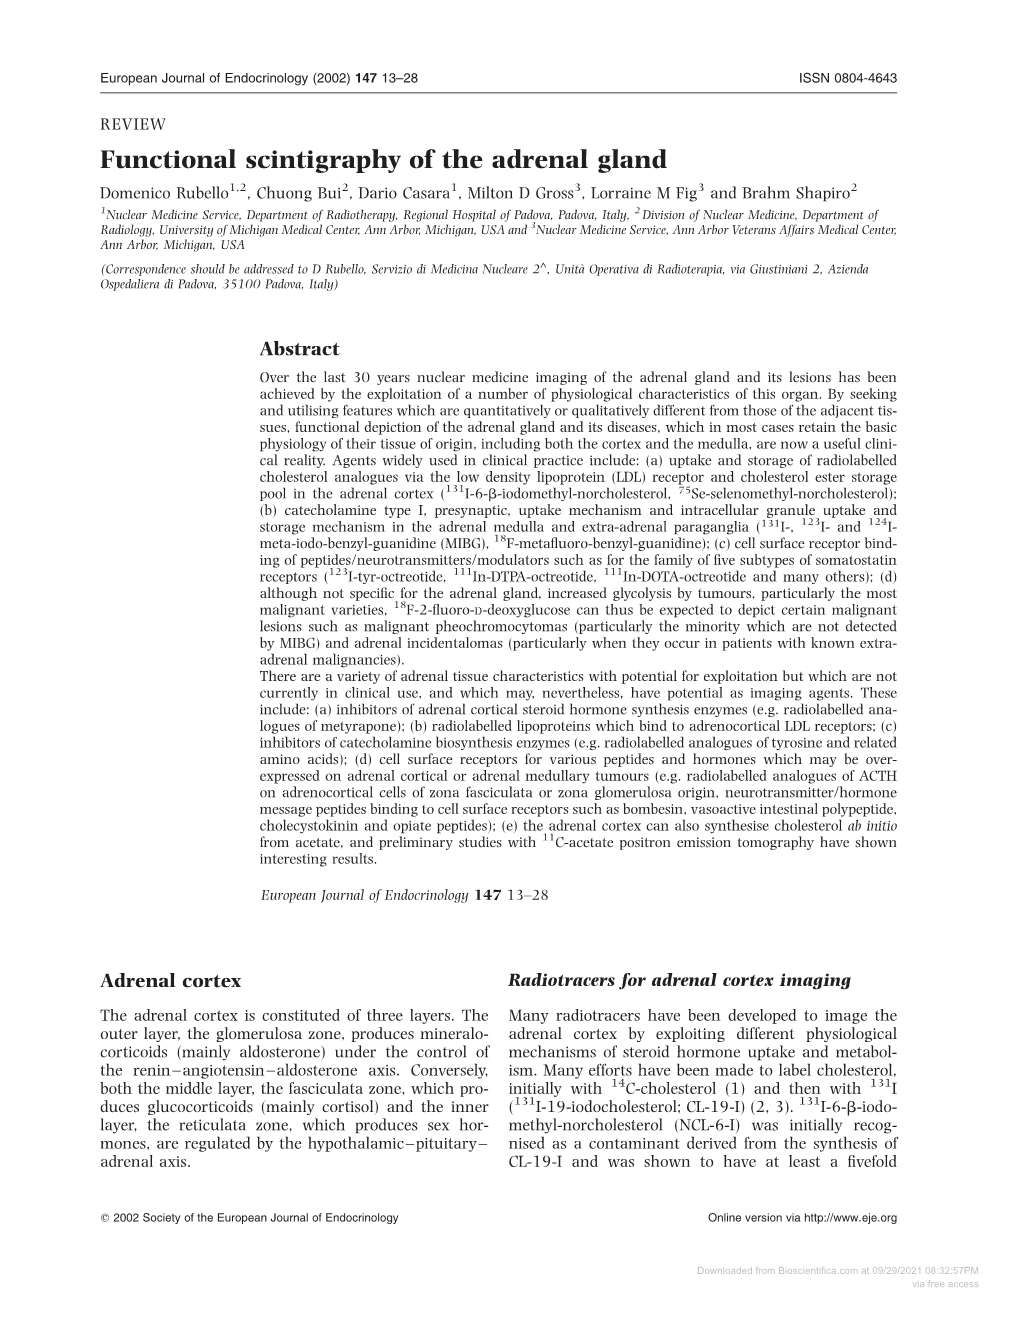 Functional Scintigraphy of the Adrenal Gland